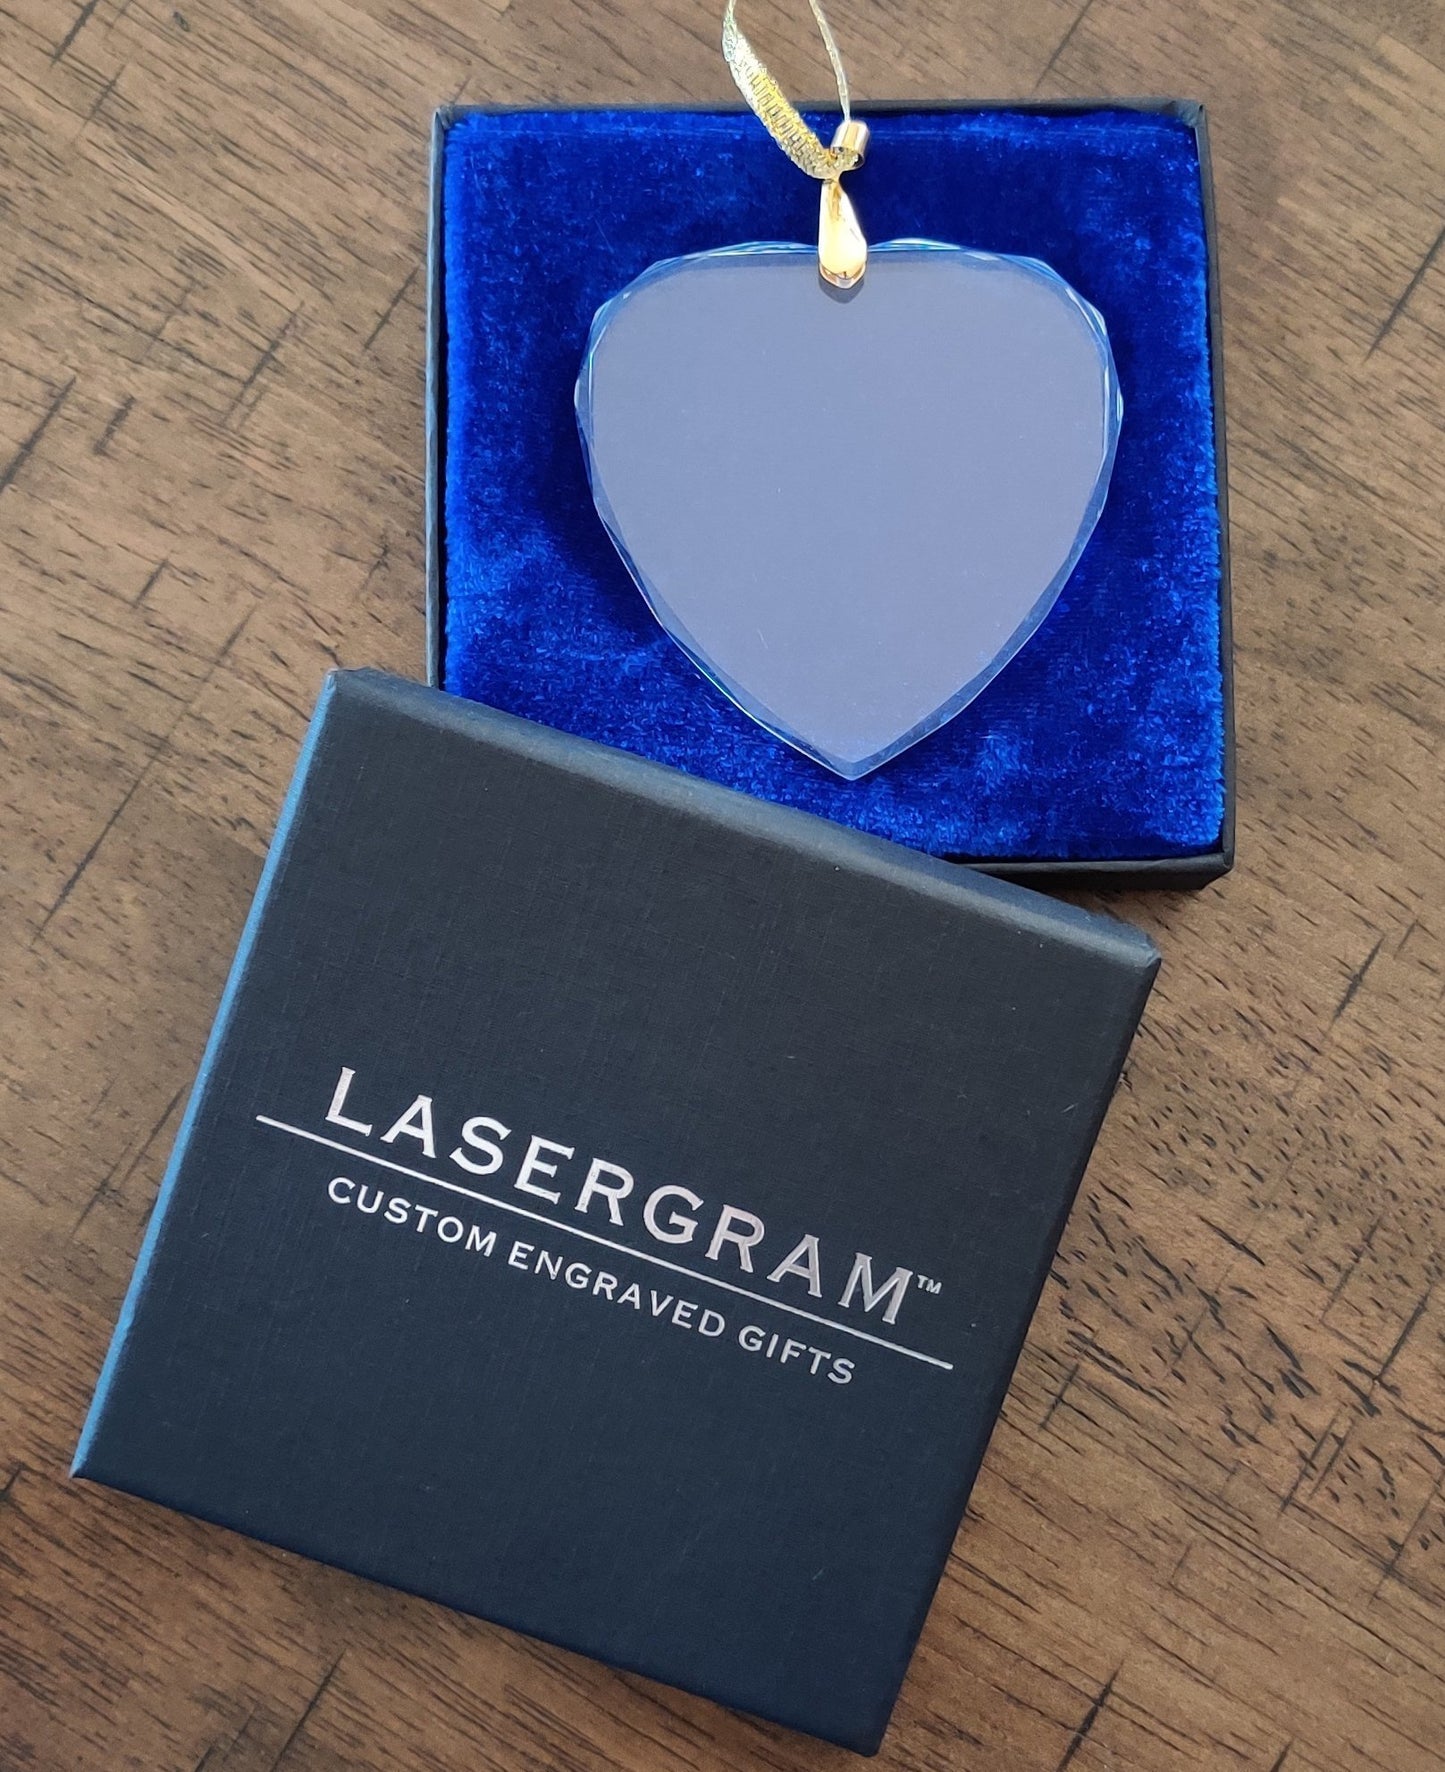 LaserGram Christmas Ornament, Lineman, Personalized Engraving Included (Heart Shape)